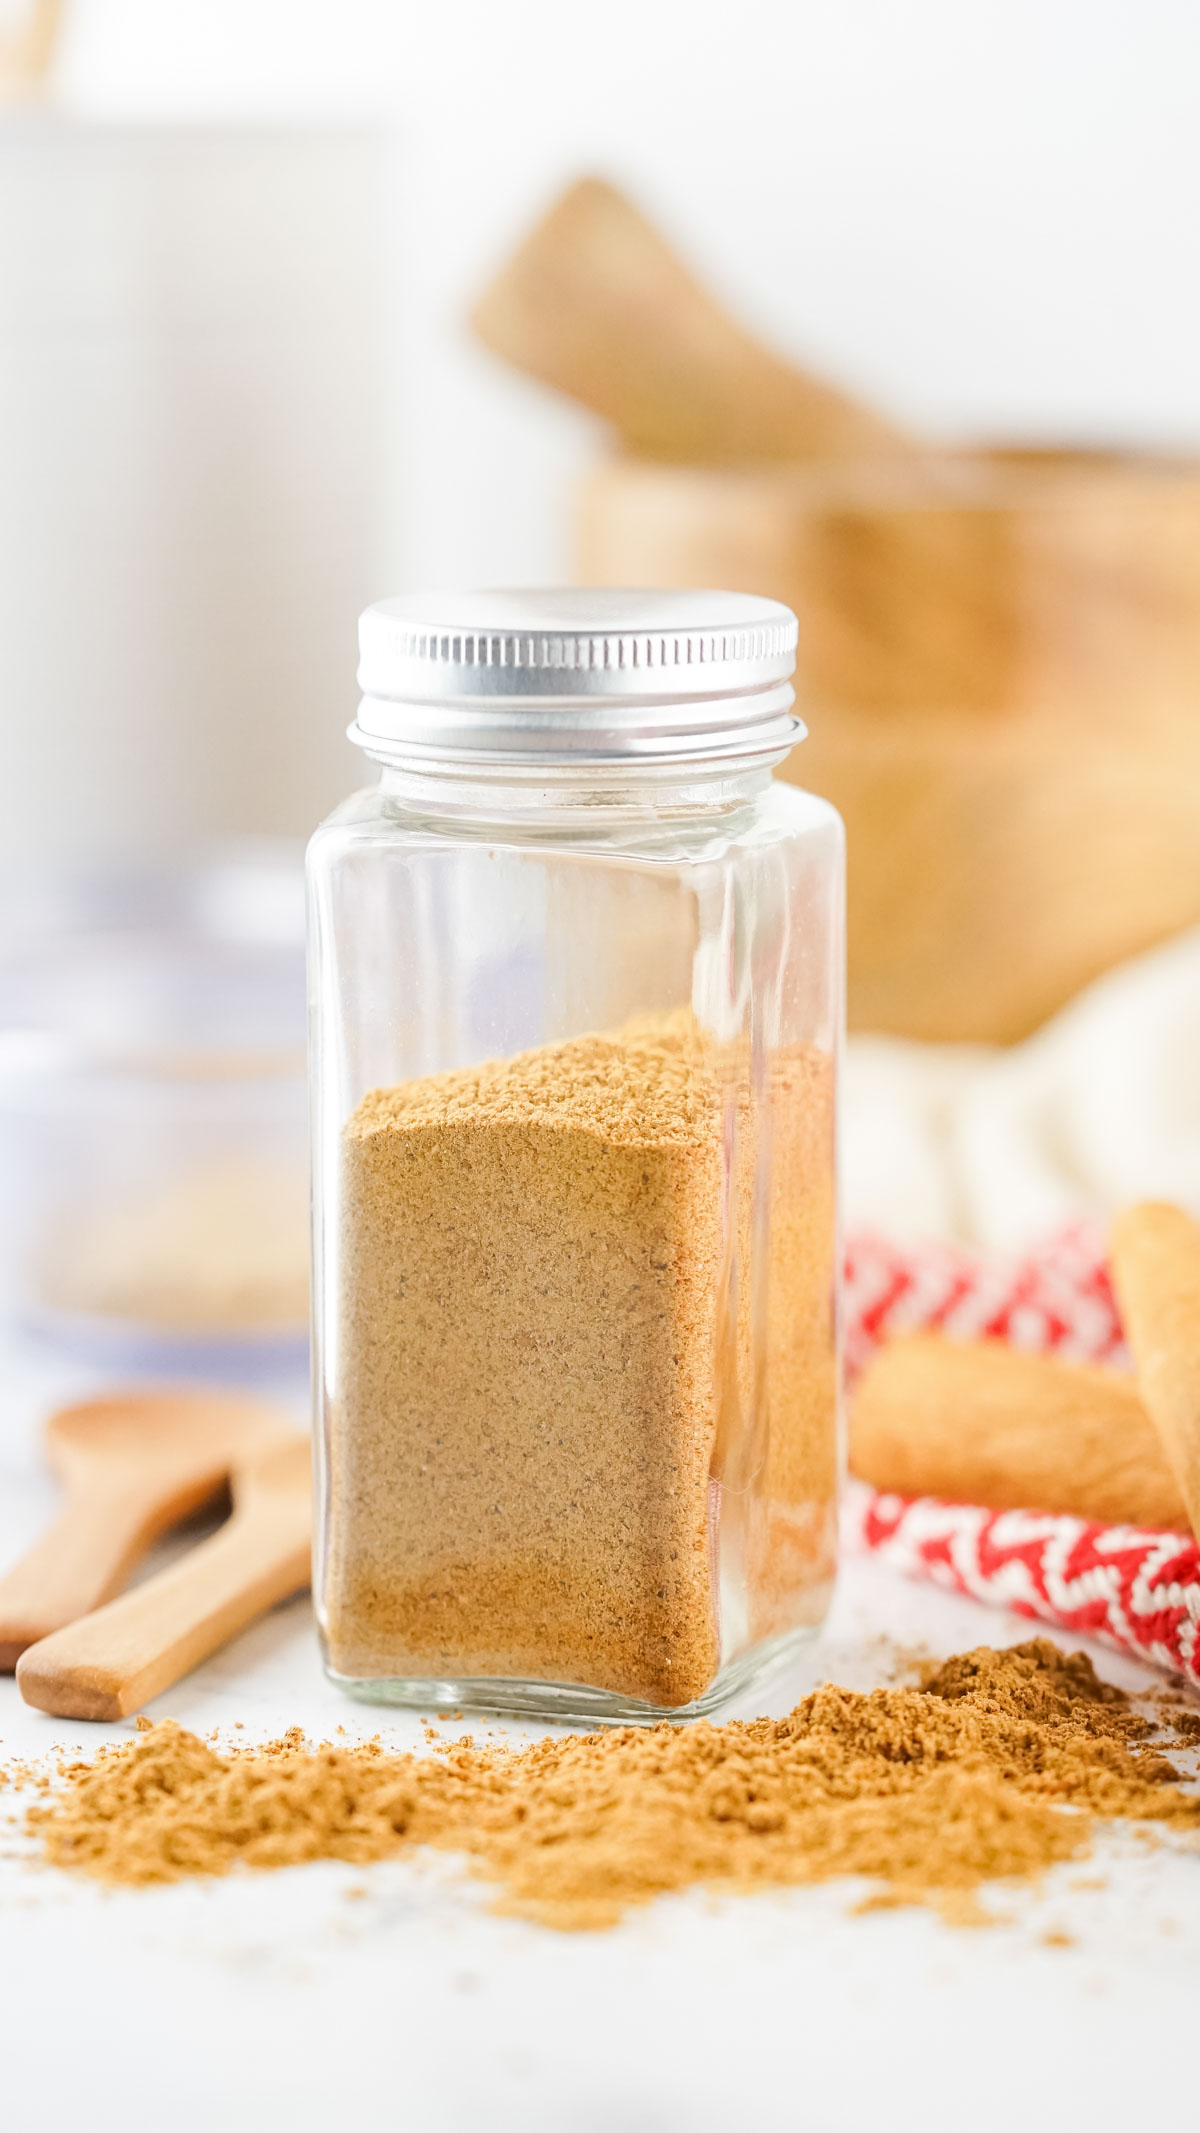 The spice mix for gingerbread in a spice jar.